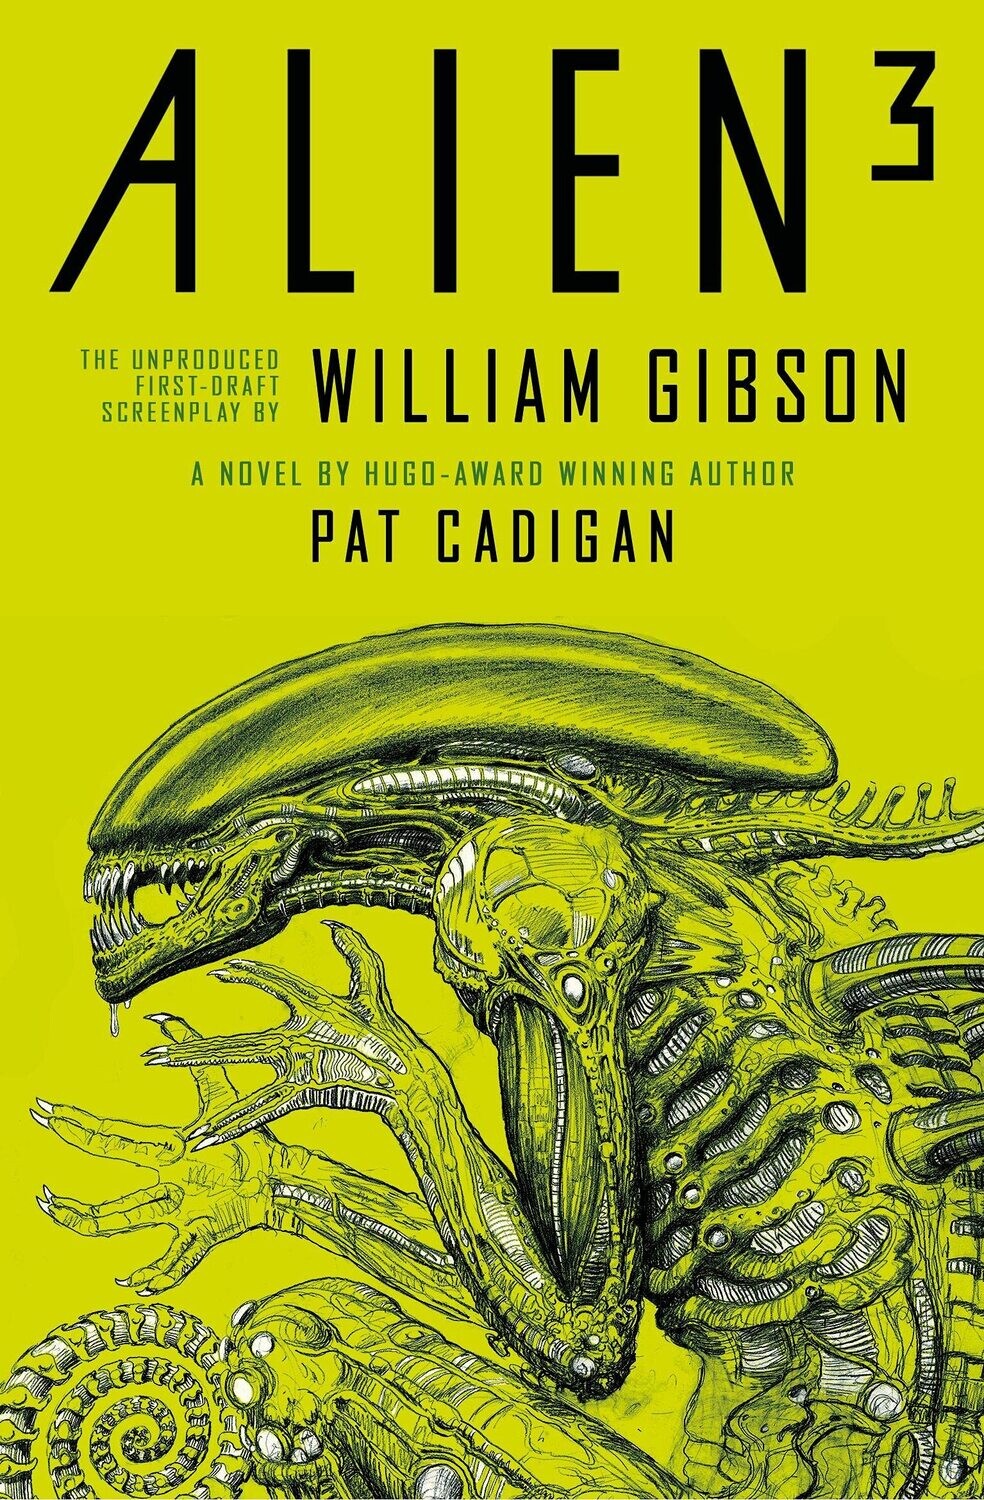 William Gibson&#39;s Alien 3: The Unproduced Screenplay (Hardcover, NEW)